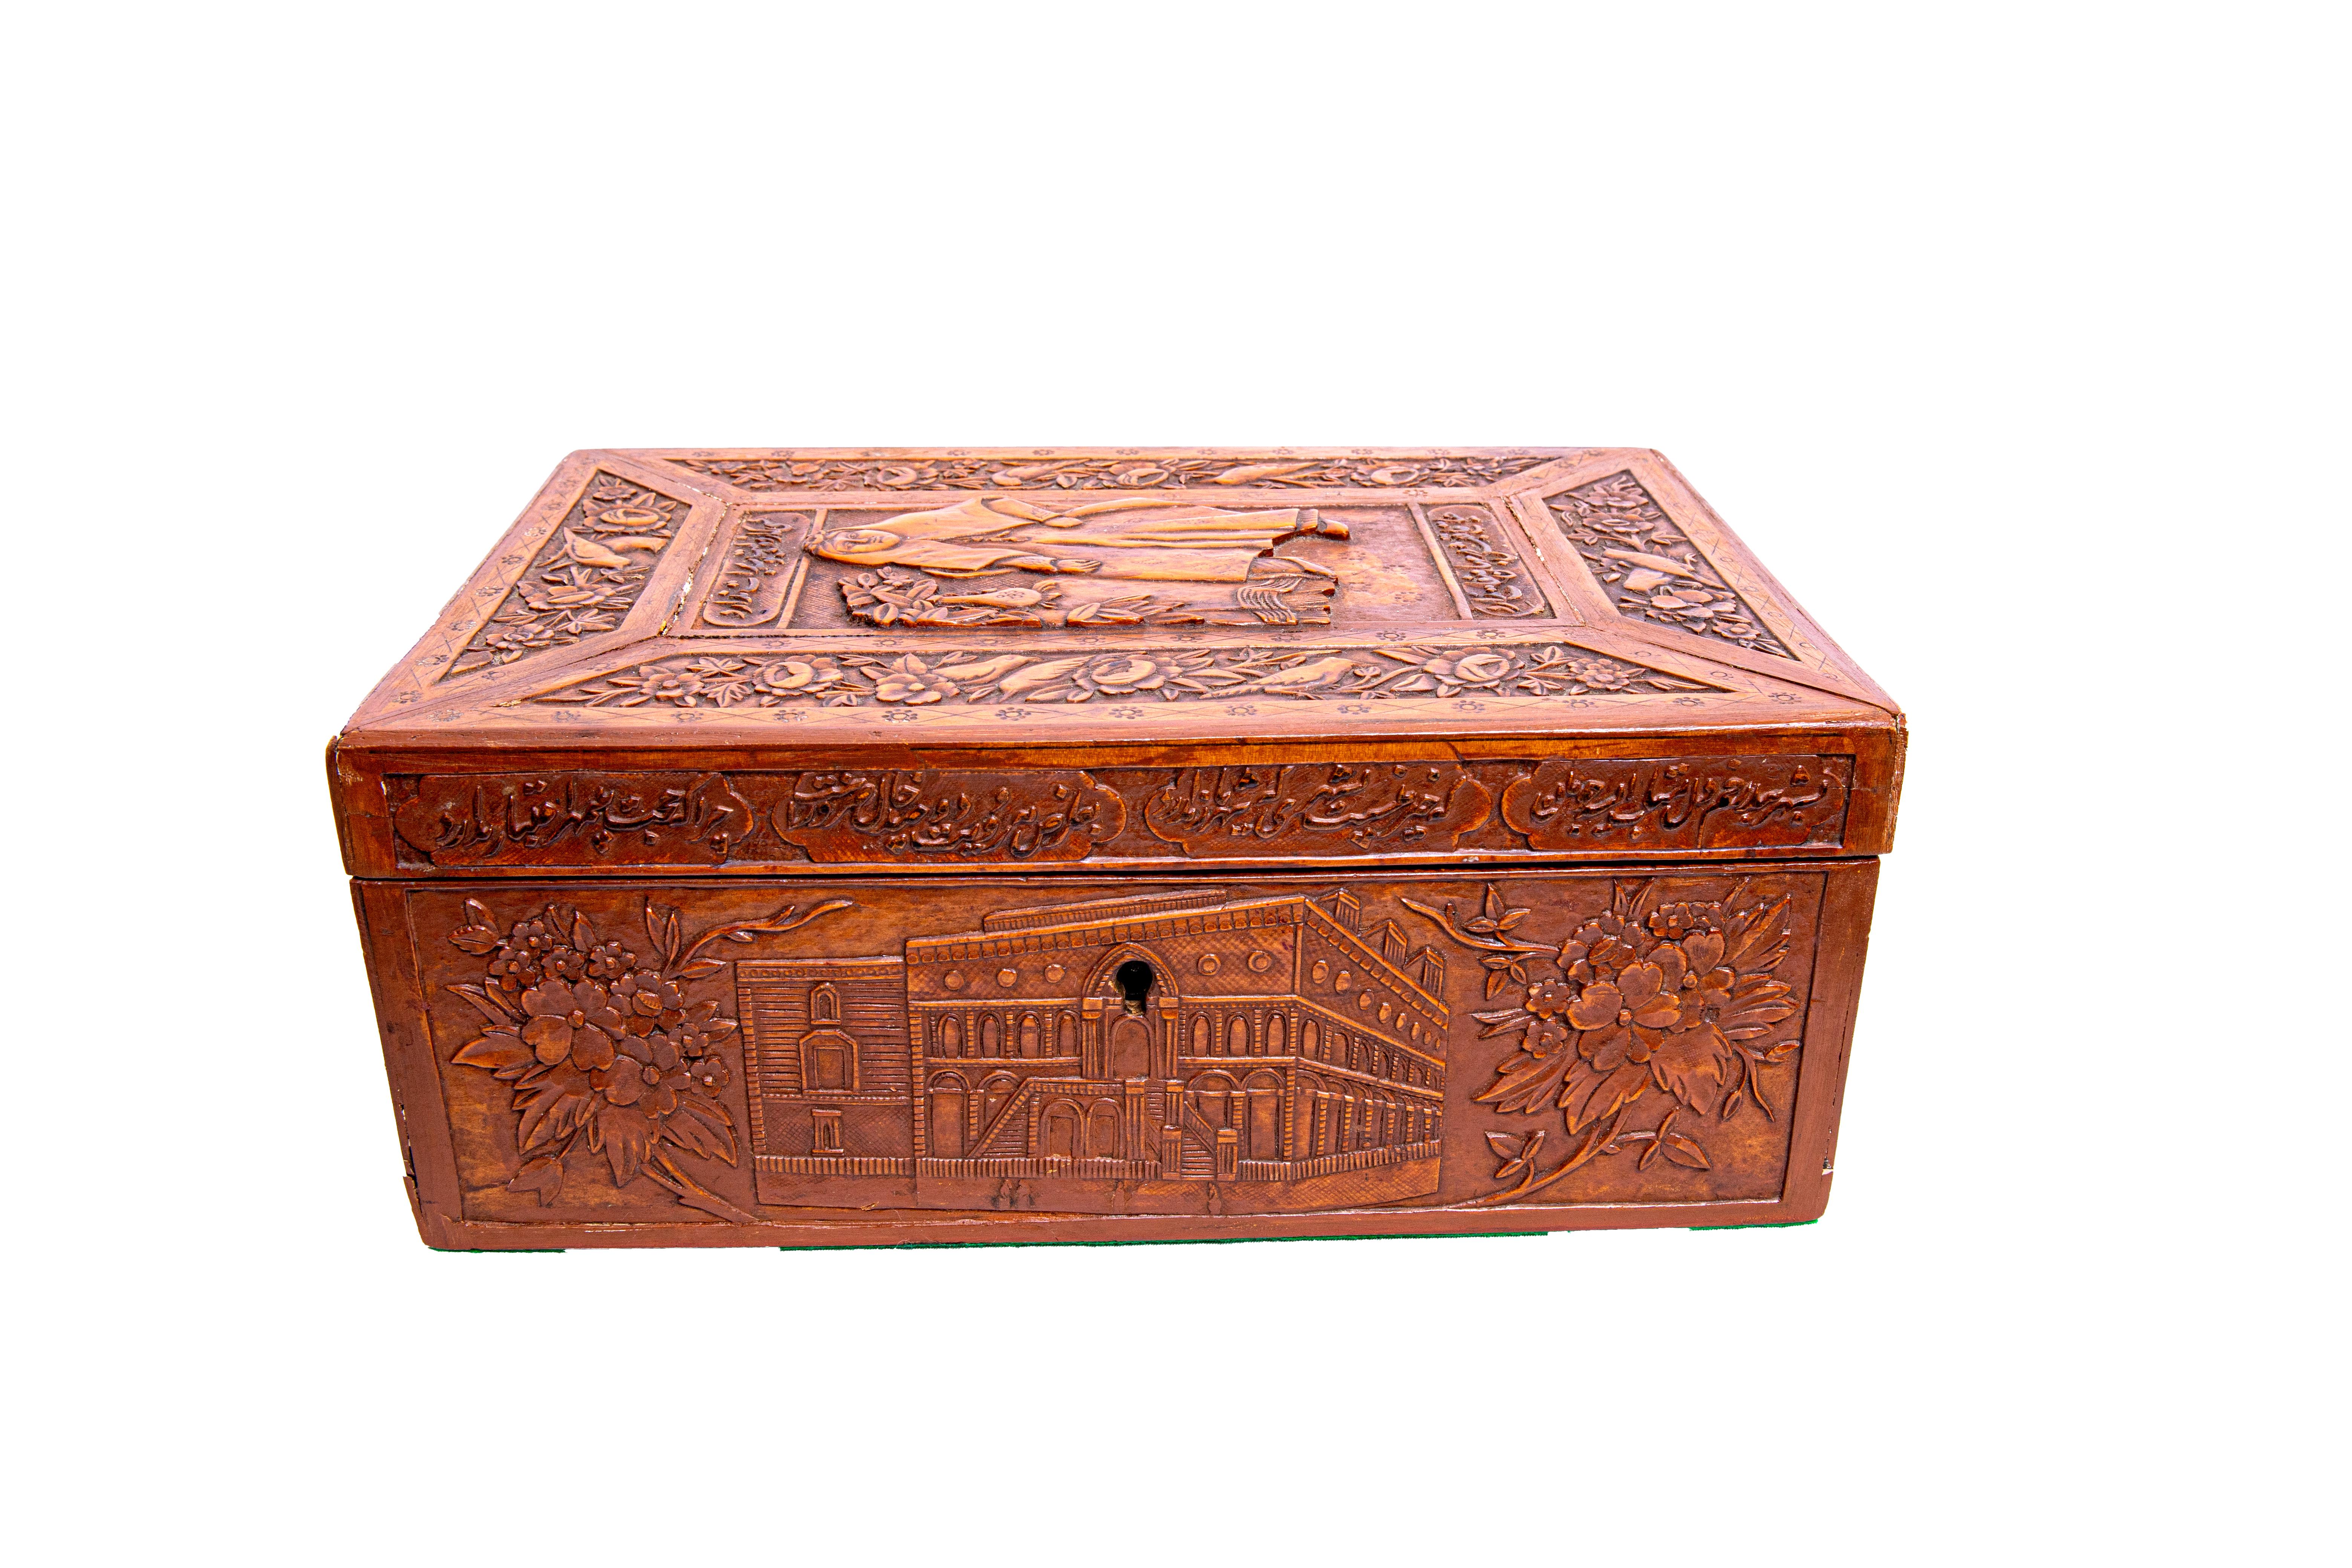 Of rectangular form, the flat top with raised central panel depicts a seated Qajari women wearing a traditional clothes surrounded by flowers and birds design boarders and calligraphy, the sides deeply decorated with different scenes and